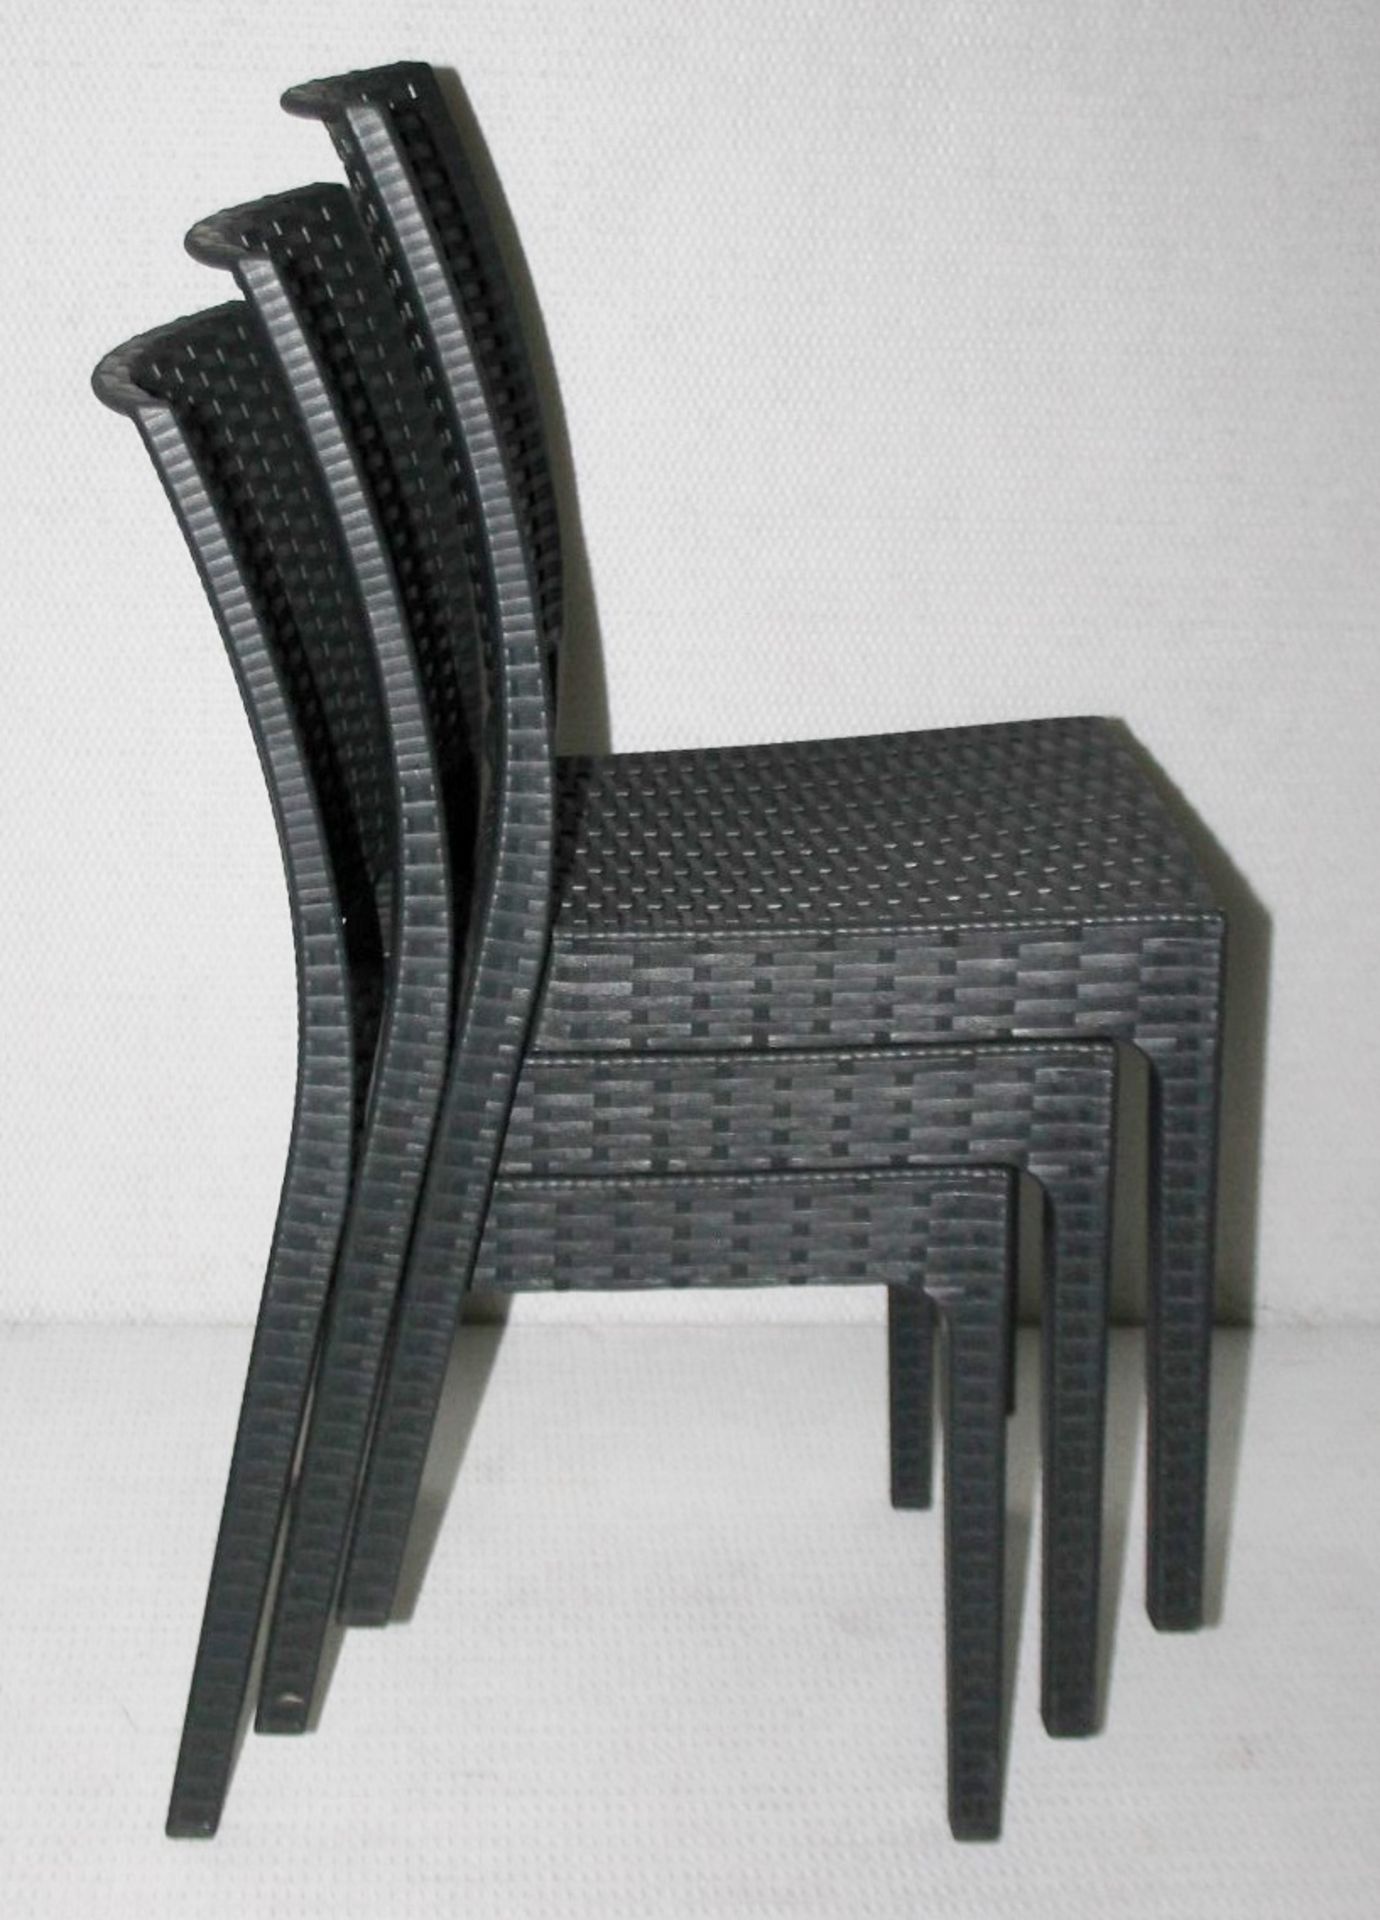 8 x Siesta 'Florida' Rattan Style Garden Chairs In Dark Grey - Suitable For Commercial or Home Use - - Image 5 of 14